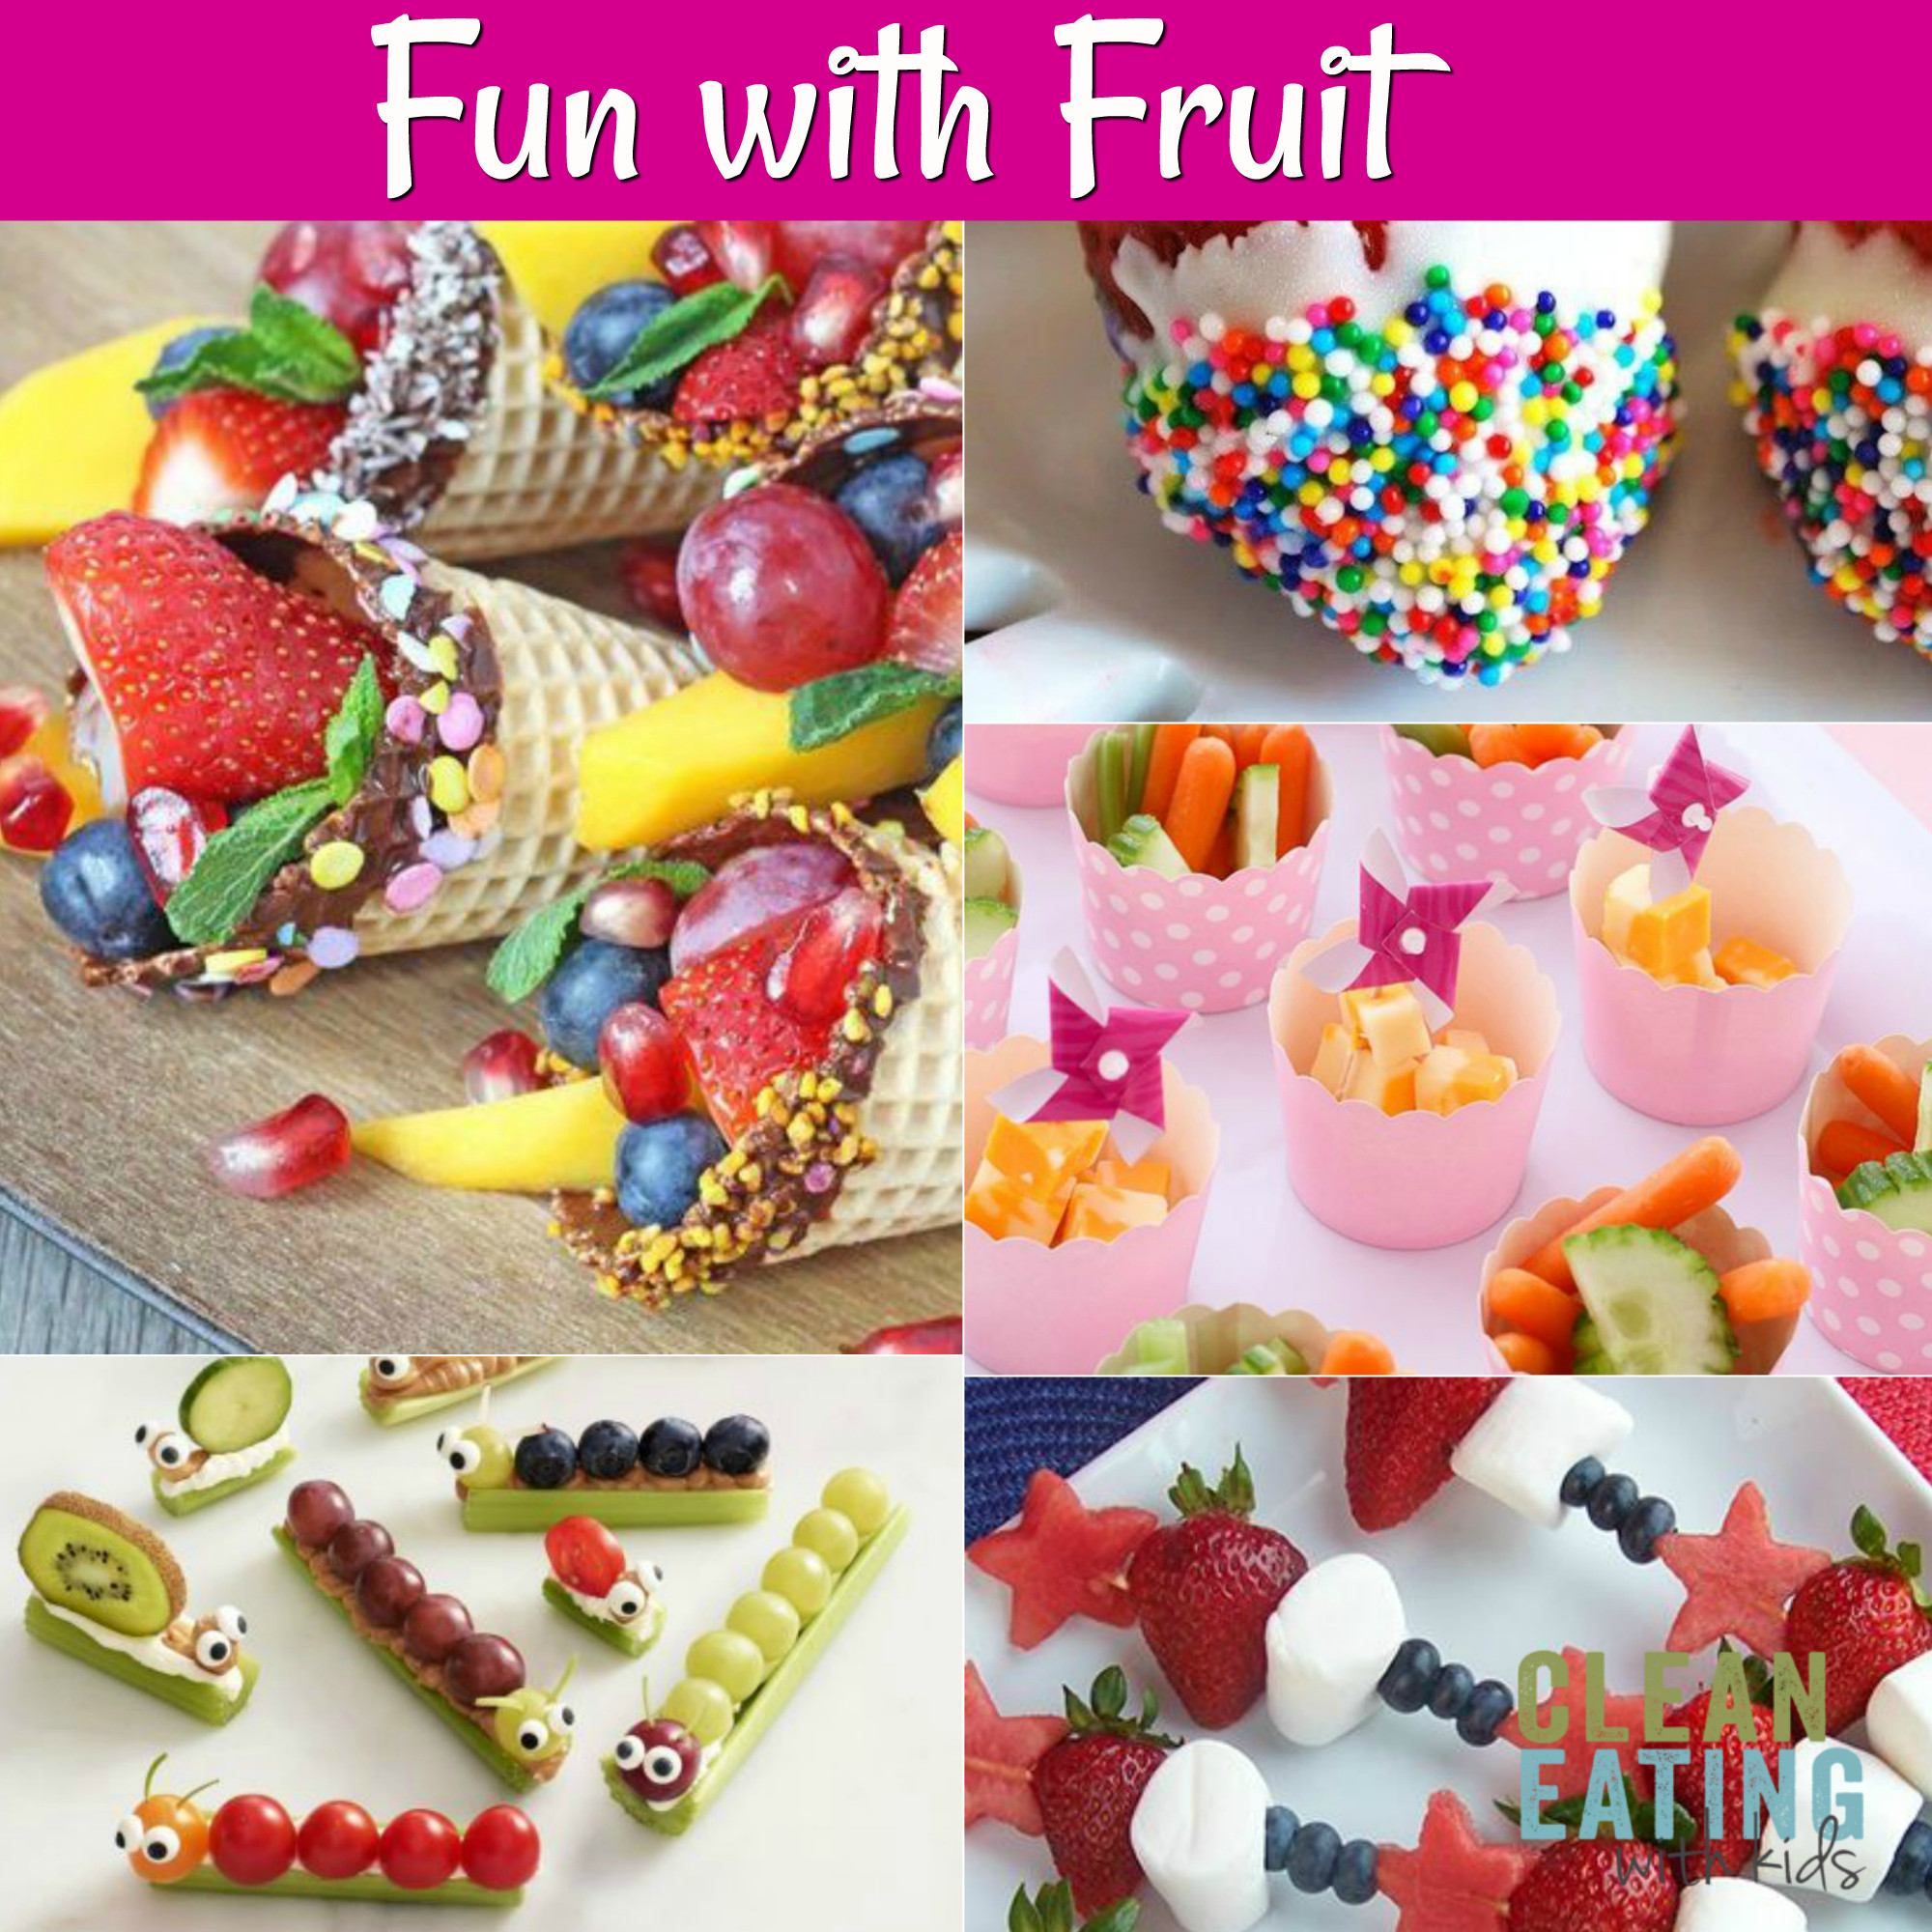 Food Ideas For Kids Birthday Party
 25 Healthy Birthday Party Food Ideas Clean Eating with kids